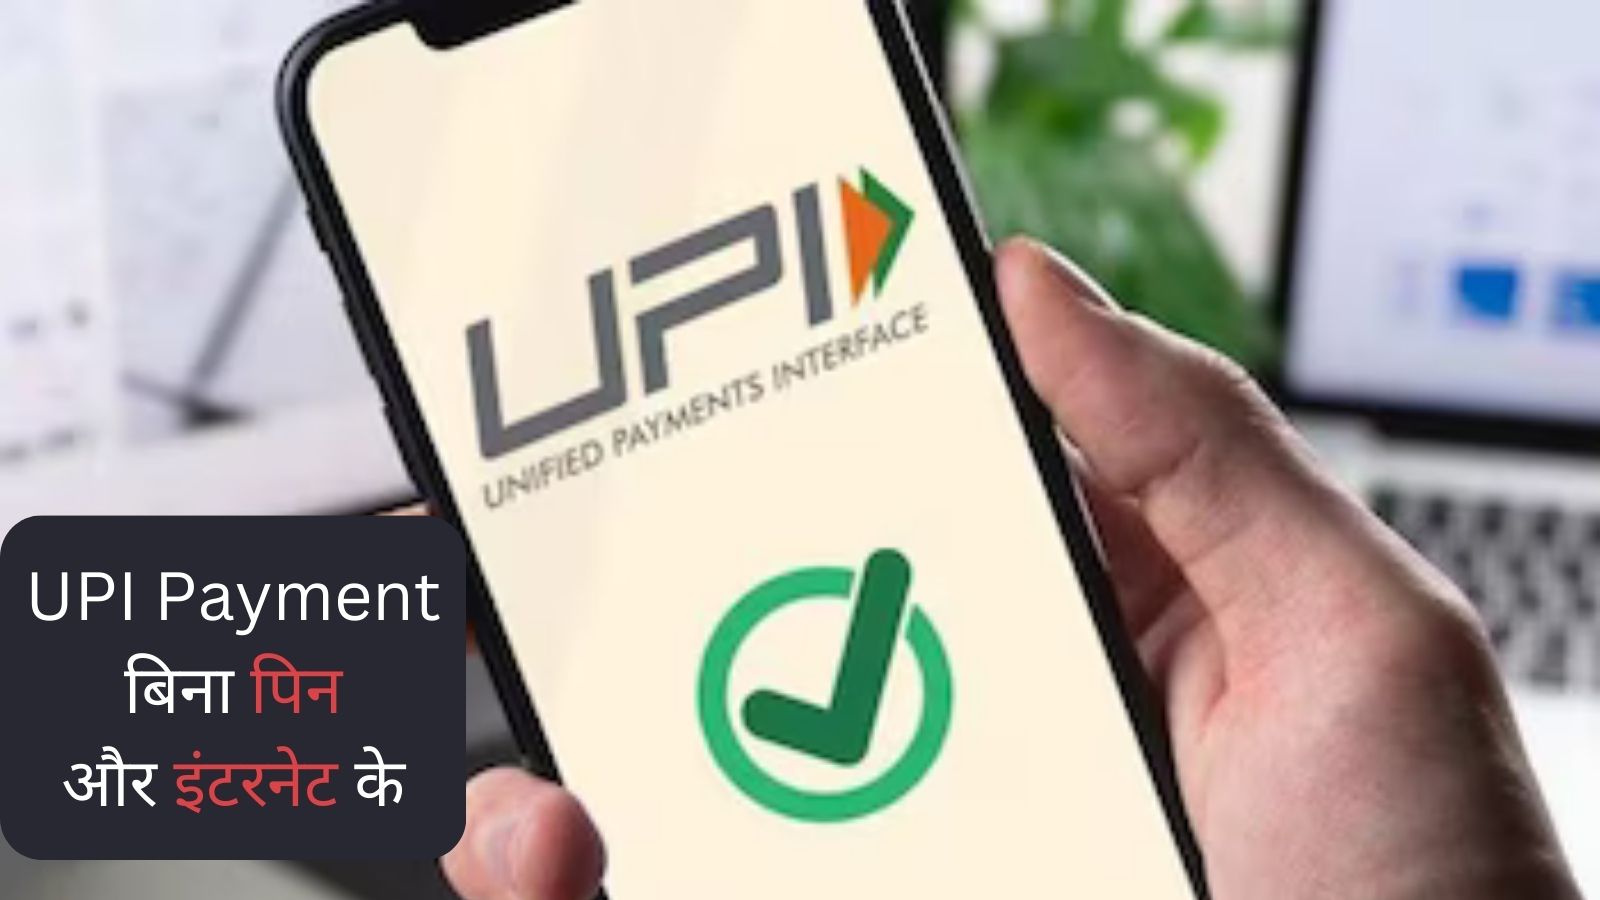 UPI Payment without PIN and Internet